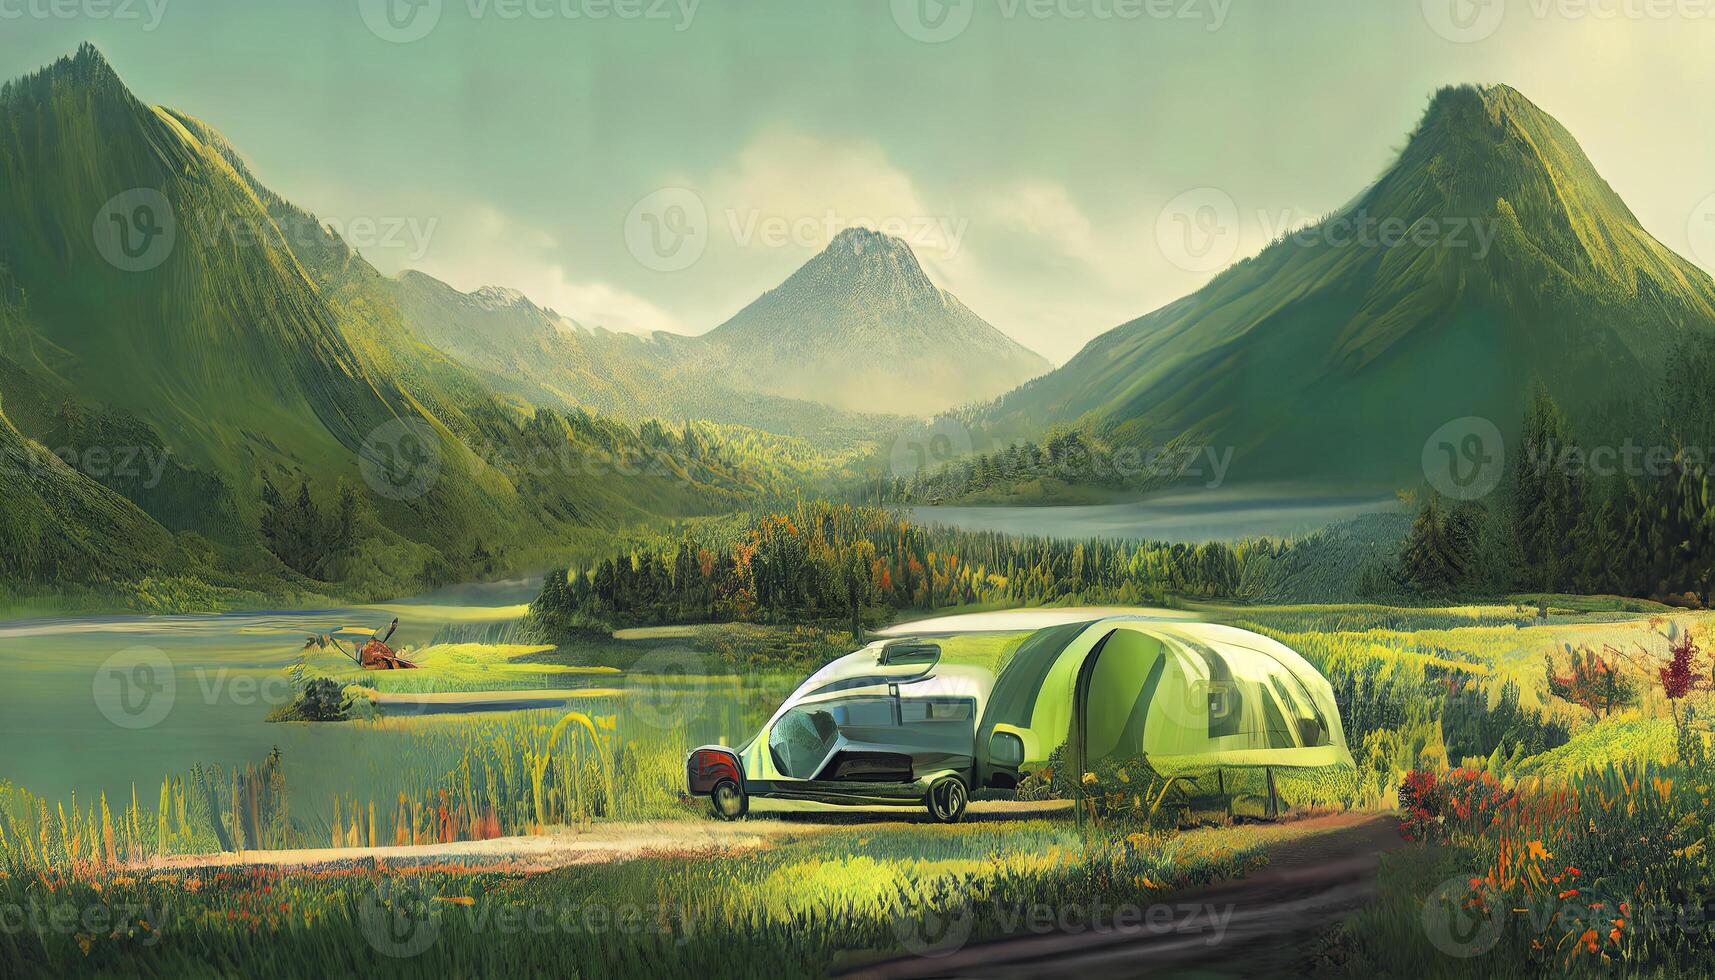 Mountain, forest, green meadow and car near a lake on opened pages of magazine. photo